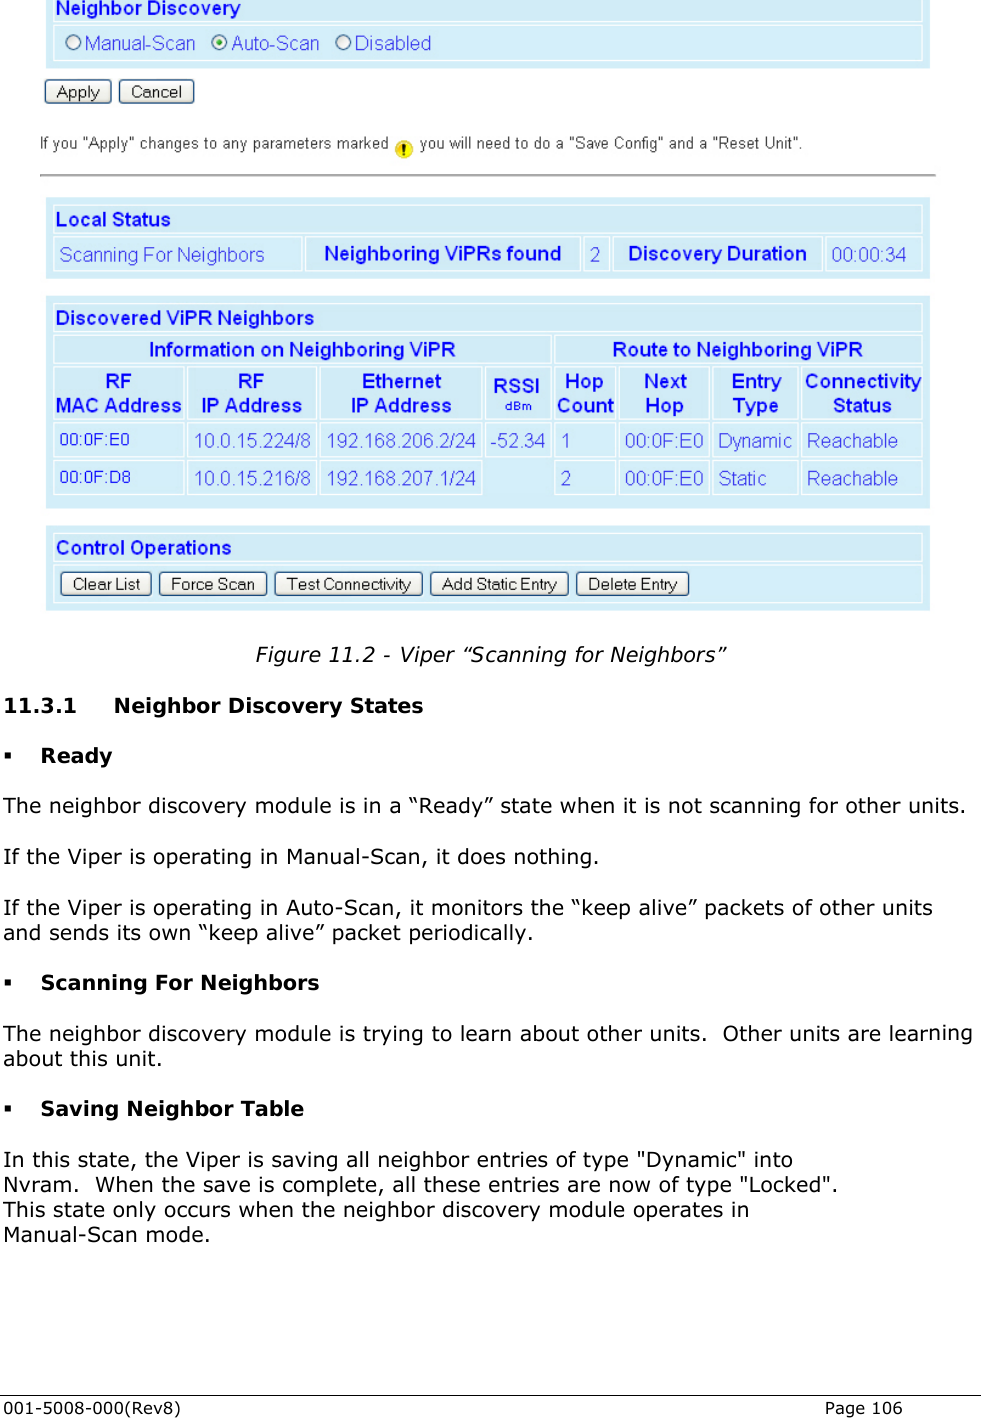    Figure 11.2 - Viper “Scanning for Neighbors” 11.3.1      Neighbor Discovery States s.  g in Manual-Scan, it does nothing.  Scanning For Neighbors ning or Table s when the neighbor discovery module operates in Manual-Scan mode.  Ready The neighbor discovery module is in a “Ready” state when it is not scanning for other unit If the Viper is operatin If the Viper is operating in Auto-Scan, it monitors the “keep alive” packets of other unitsand sends its own “keep alive” packet periodically.   The neighbor discovery module is trying to learn about other units.  Other units are learabout this unit.  Saving NeighbIn this state, the Viper is saving all neighbor entries of type &quot;Dynamic&quot; into Nvram.  When the save is complete, all these entries are now of type &quot;Locked&quot;. This state only occur001-5008-000(Rev8)   Page 106 